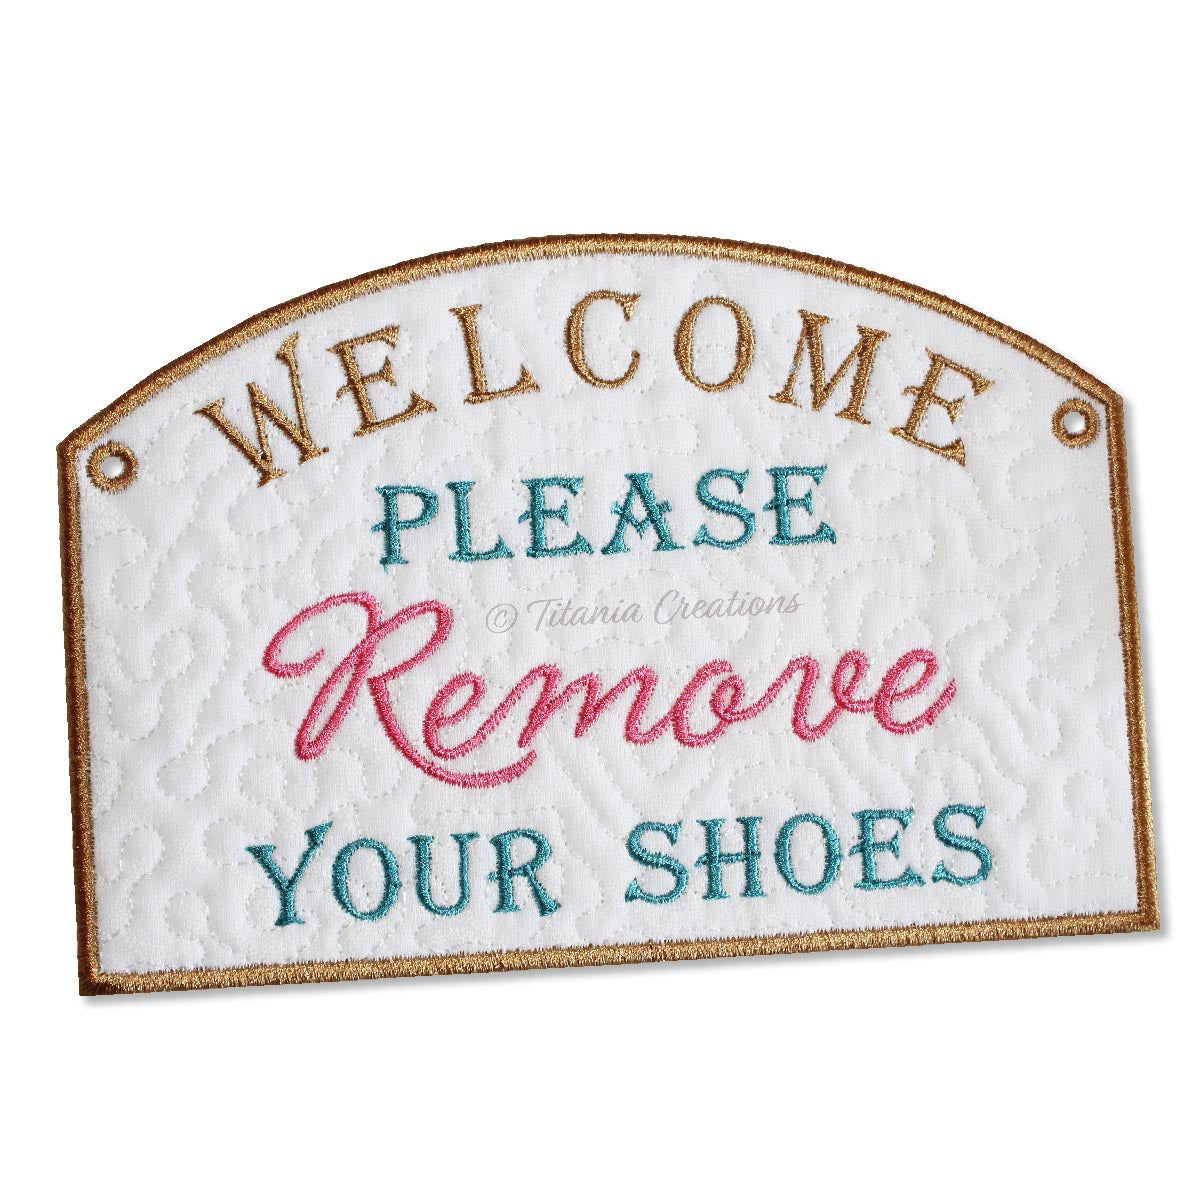 ITH Welcome Please Remove Your Shoes Door Sign 5x7